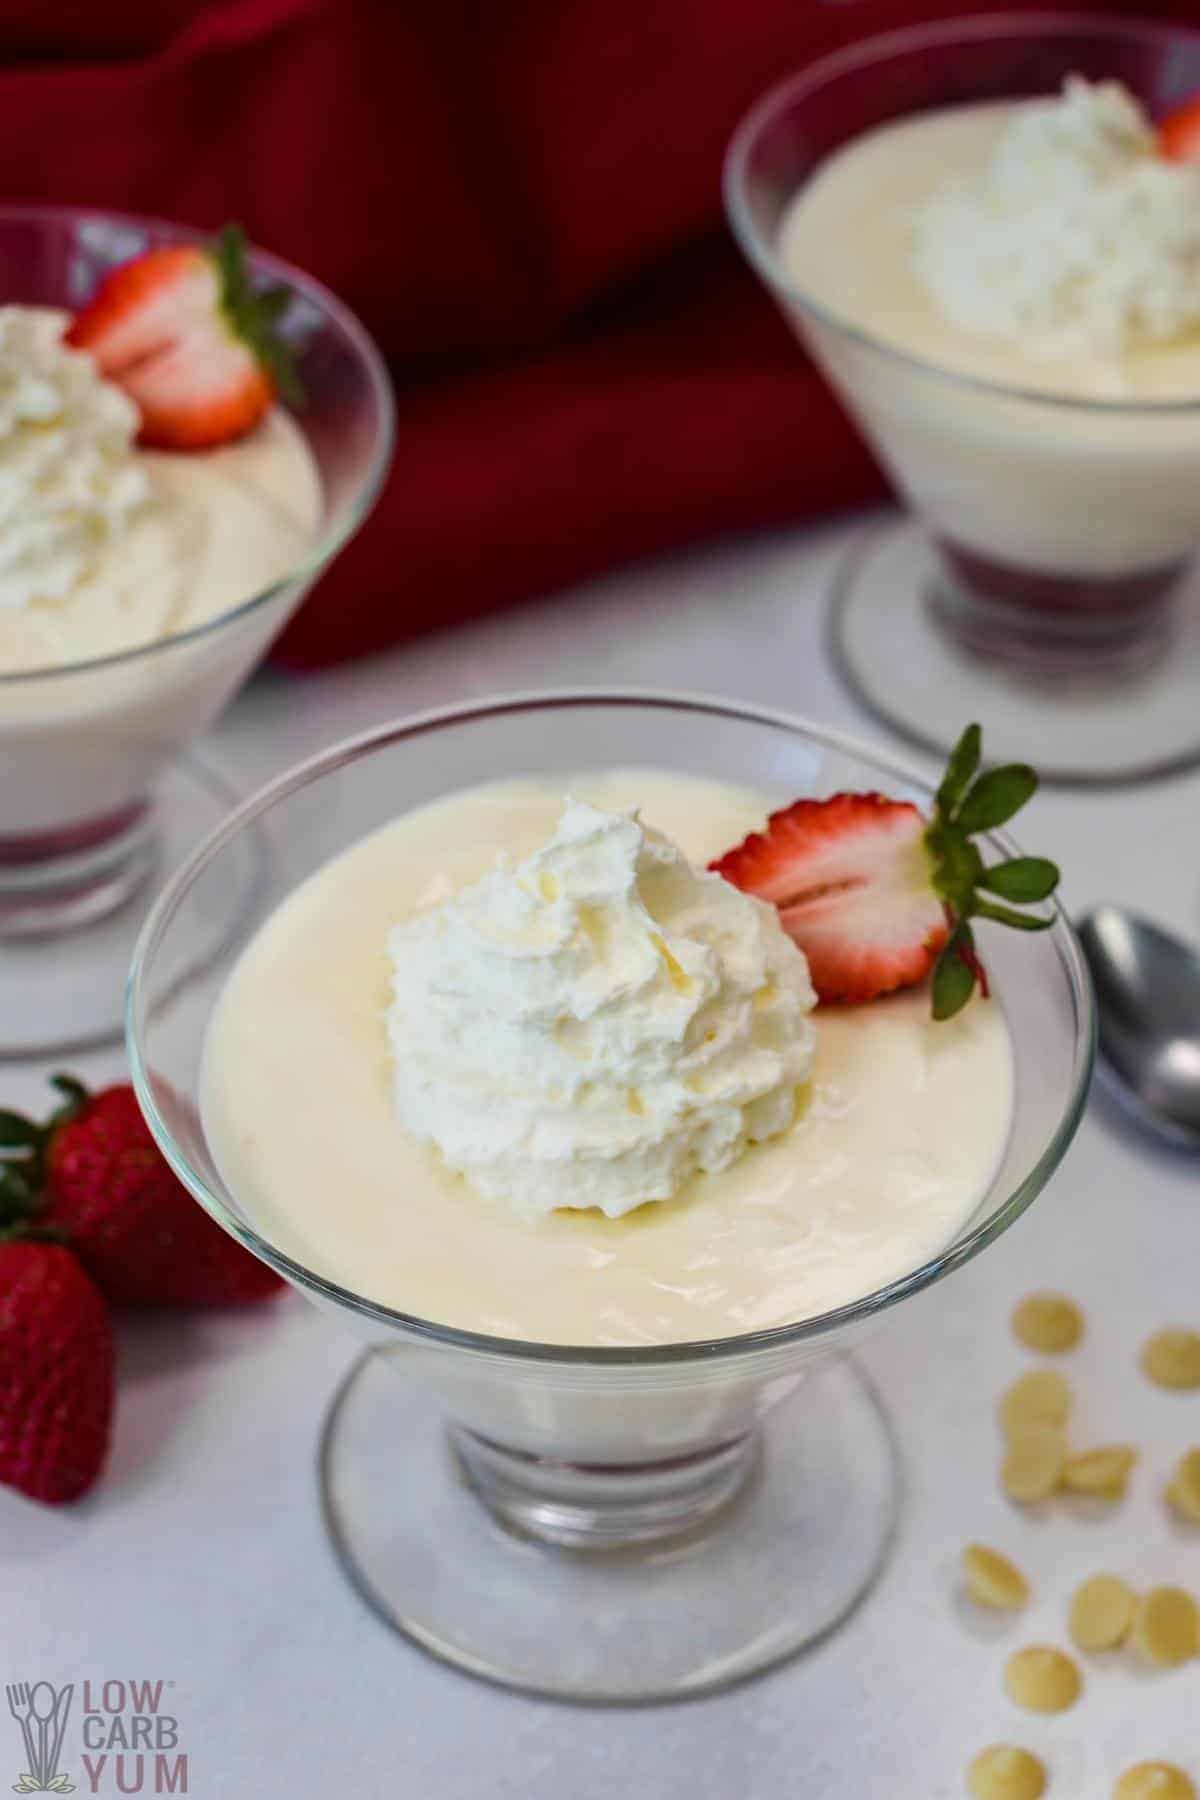 white chocolate mousse in glass dessert dishes.